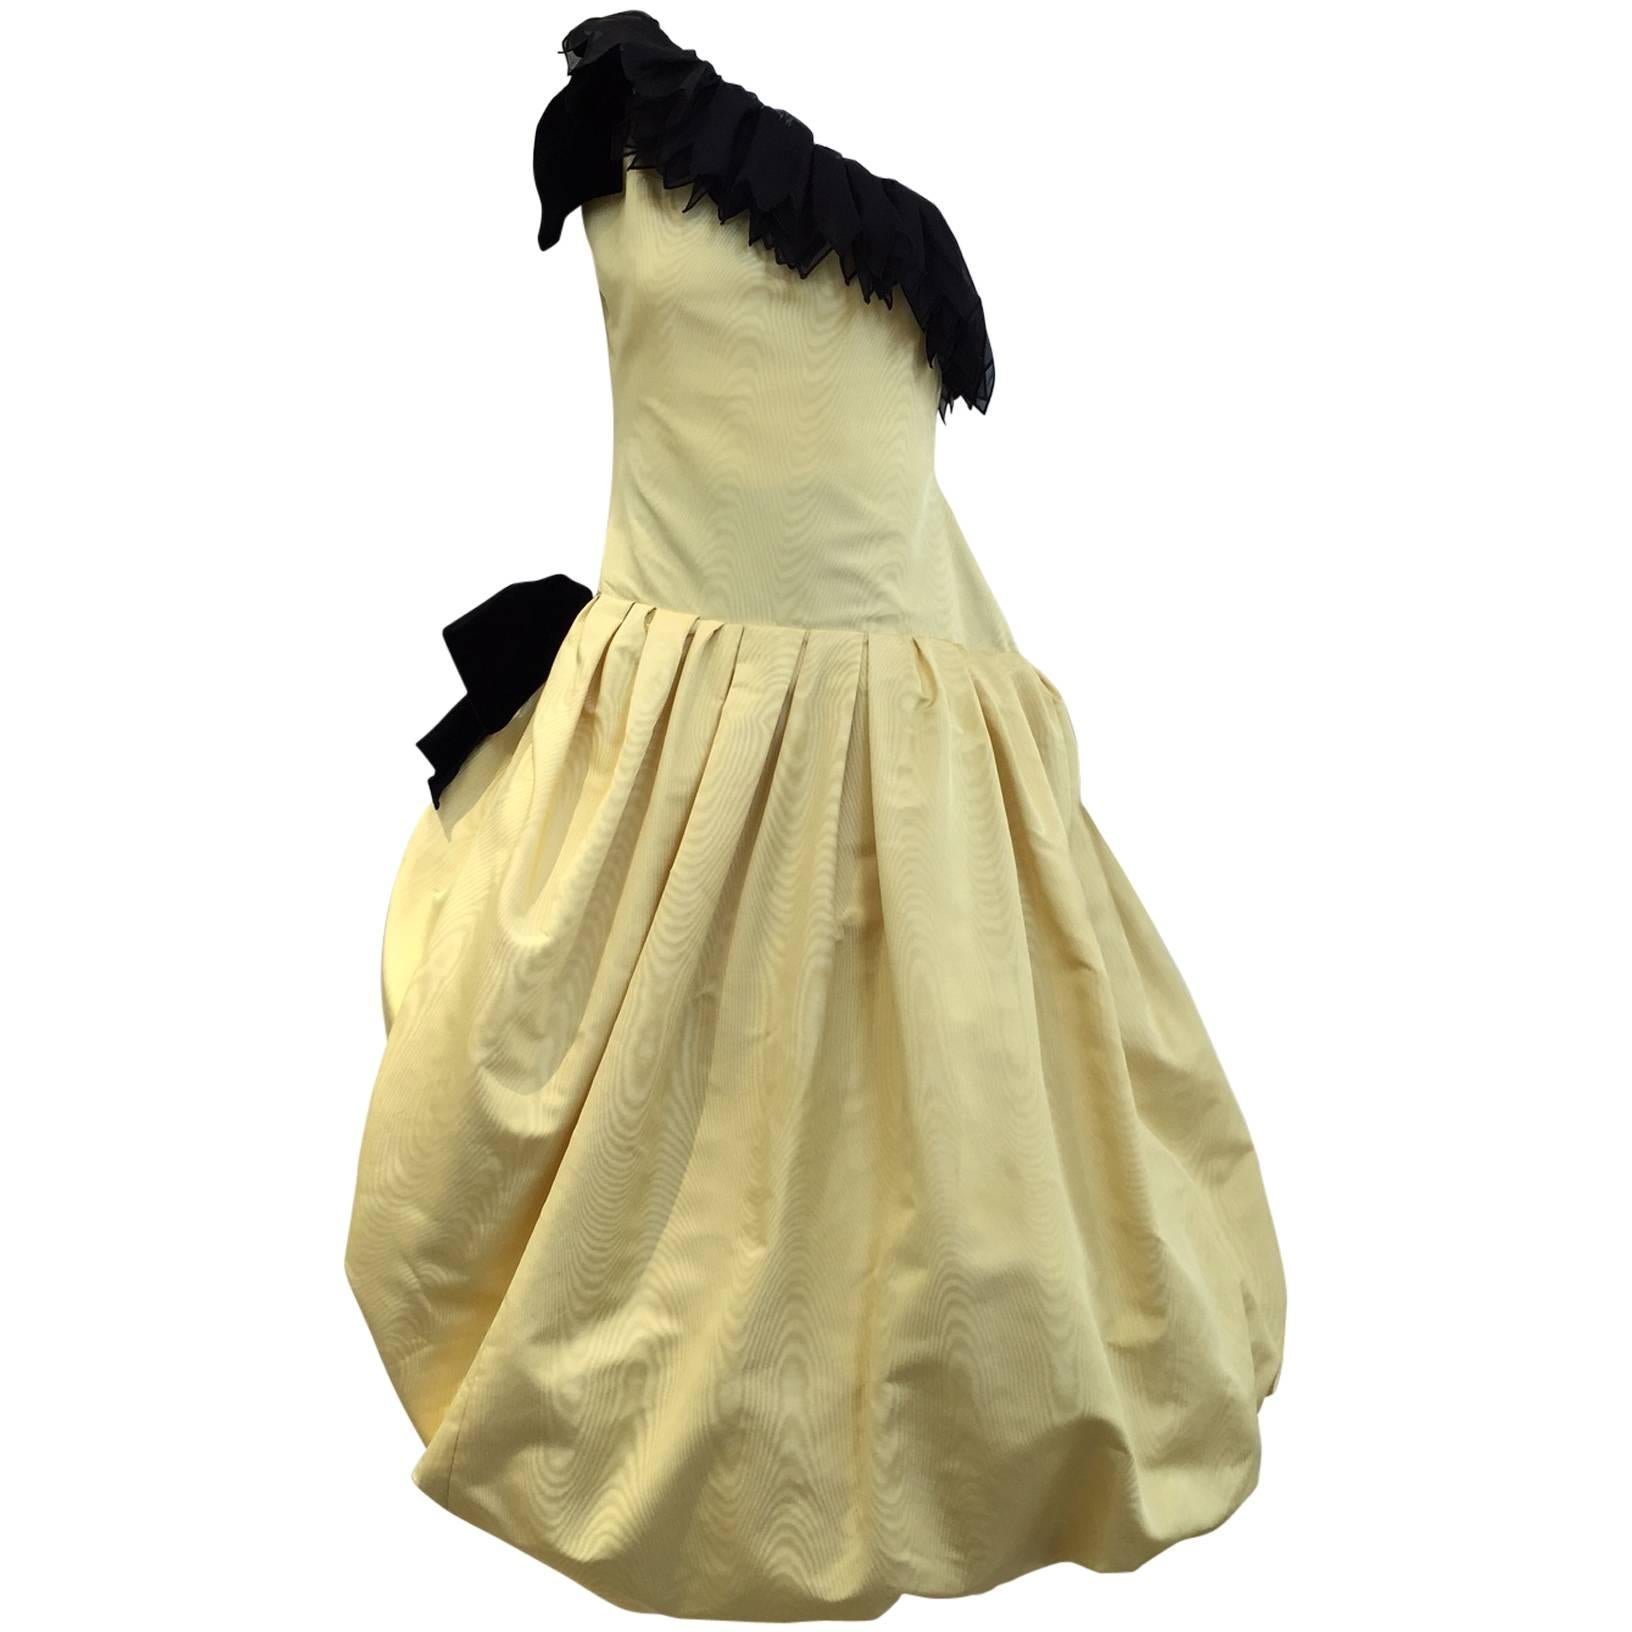 Christian Dior by Marc Bohan Haute Couture 1982 
Yellow Silk Cocktail Dress